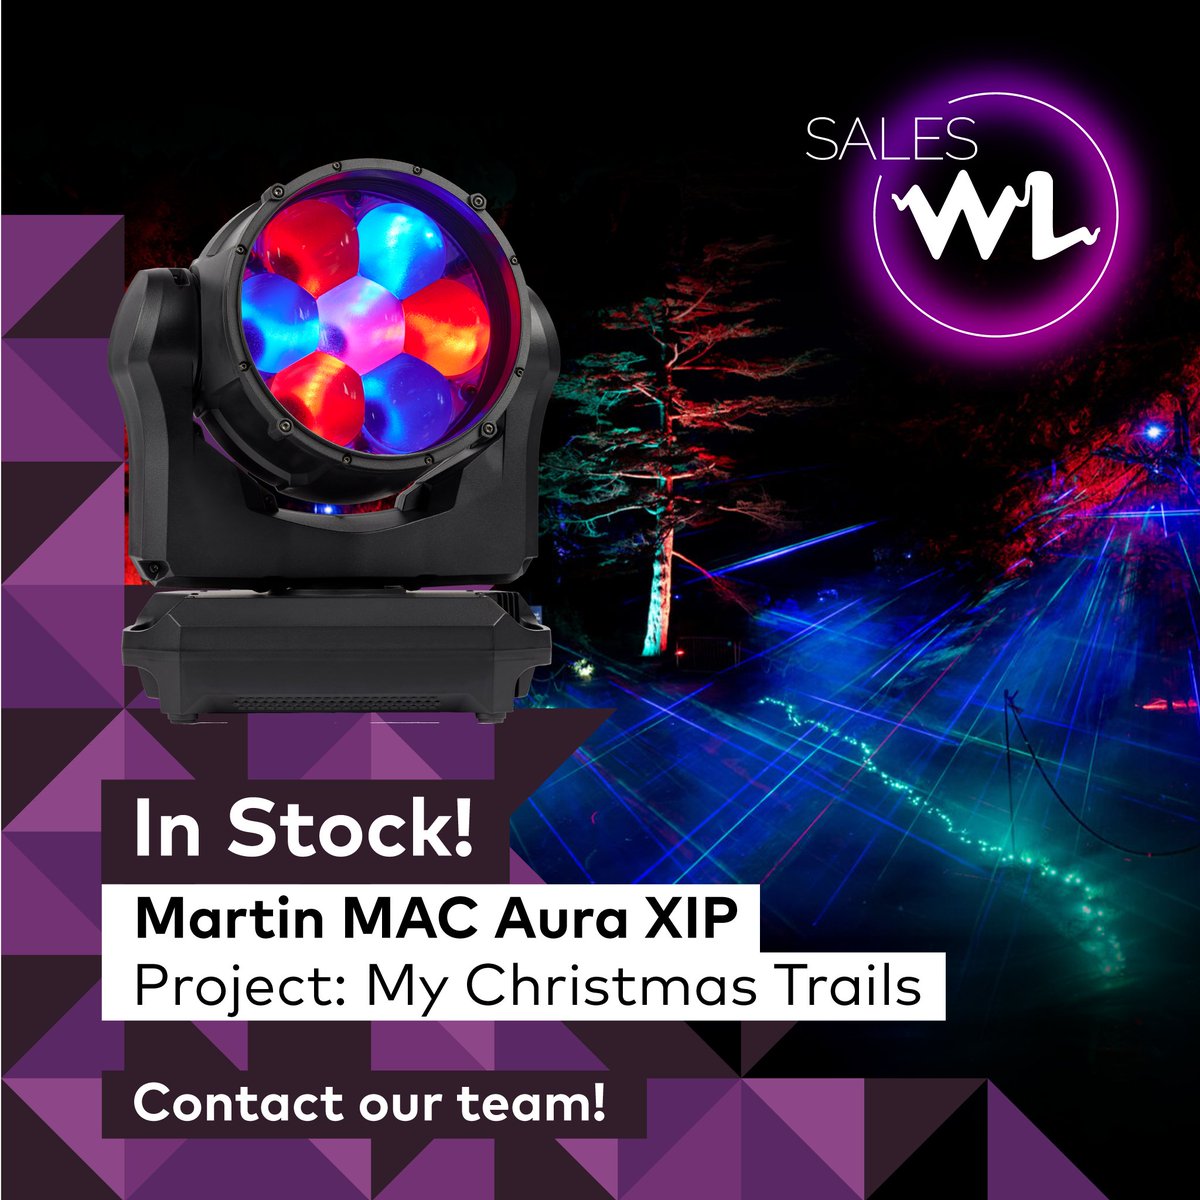 Buy It Now – @Martin_Globa MAC Aura XIP The MAC Aura XIP is a premium moving head wash light with a radical aura filament effect and full pixel control with video mapping capabilities onto the beam, aura or both. B Now available to purchase via SalesWL: hubs.la/Q02pwDzq0